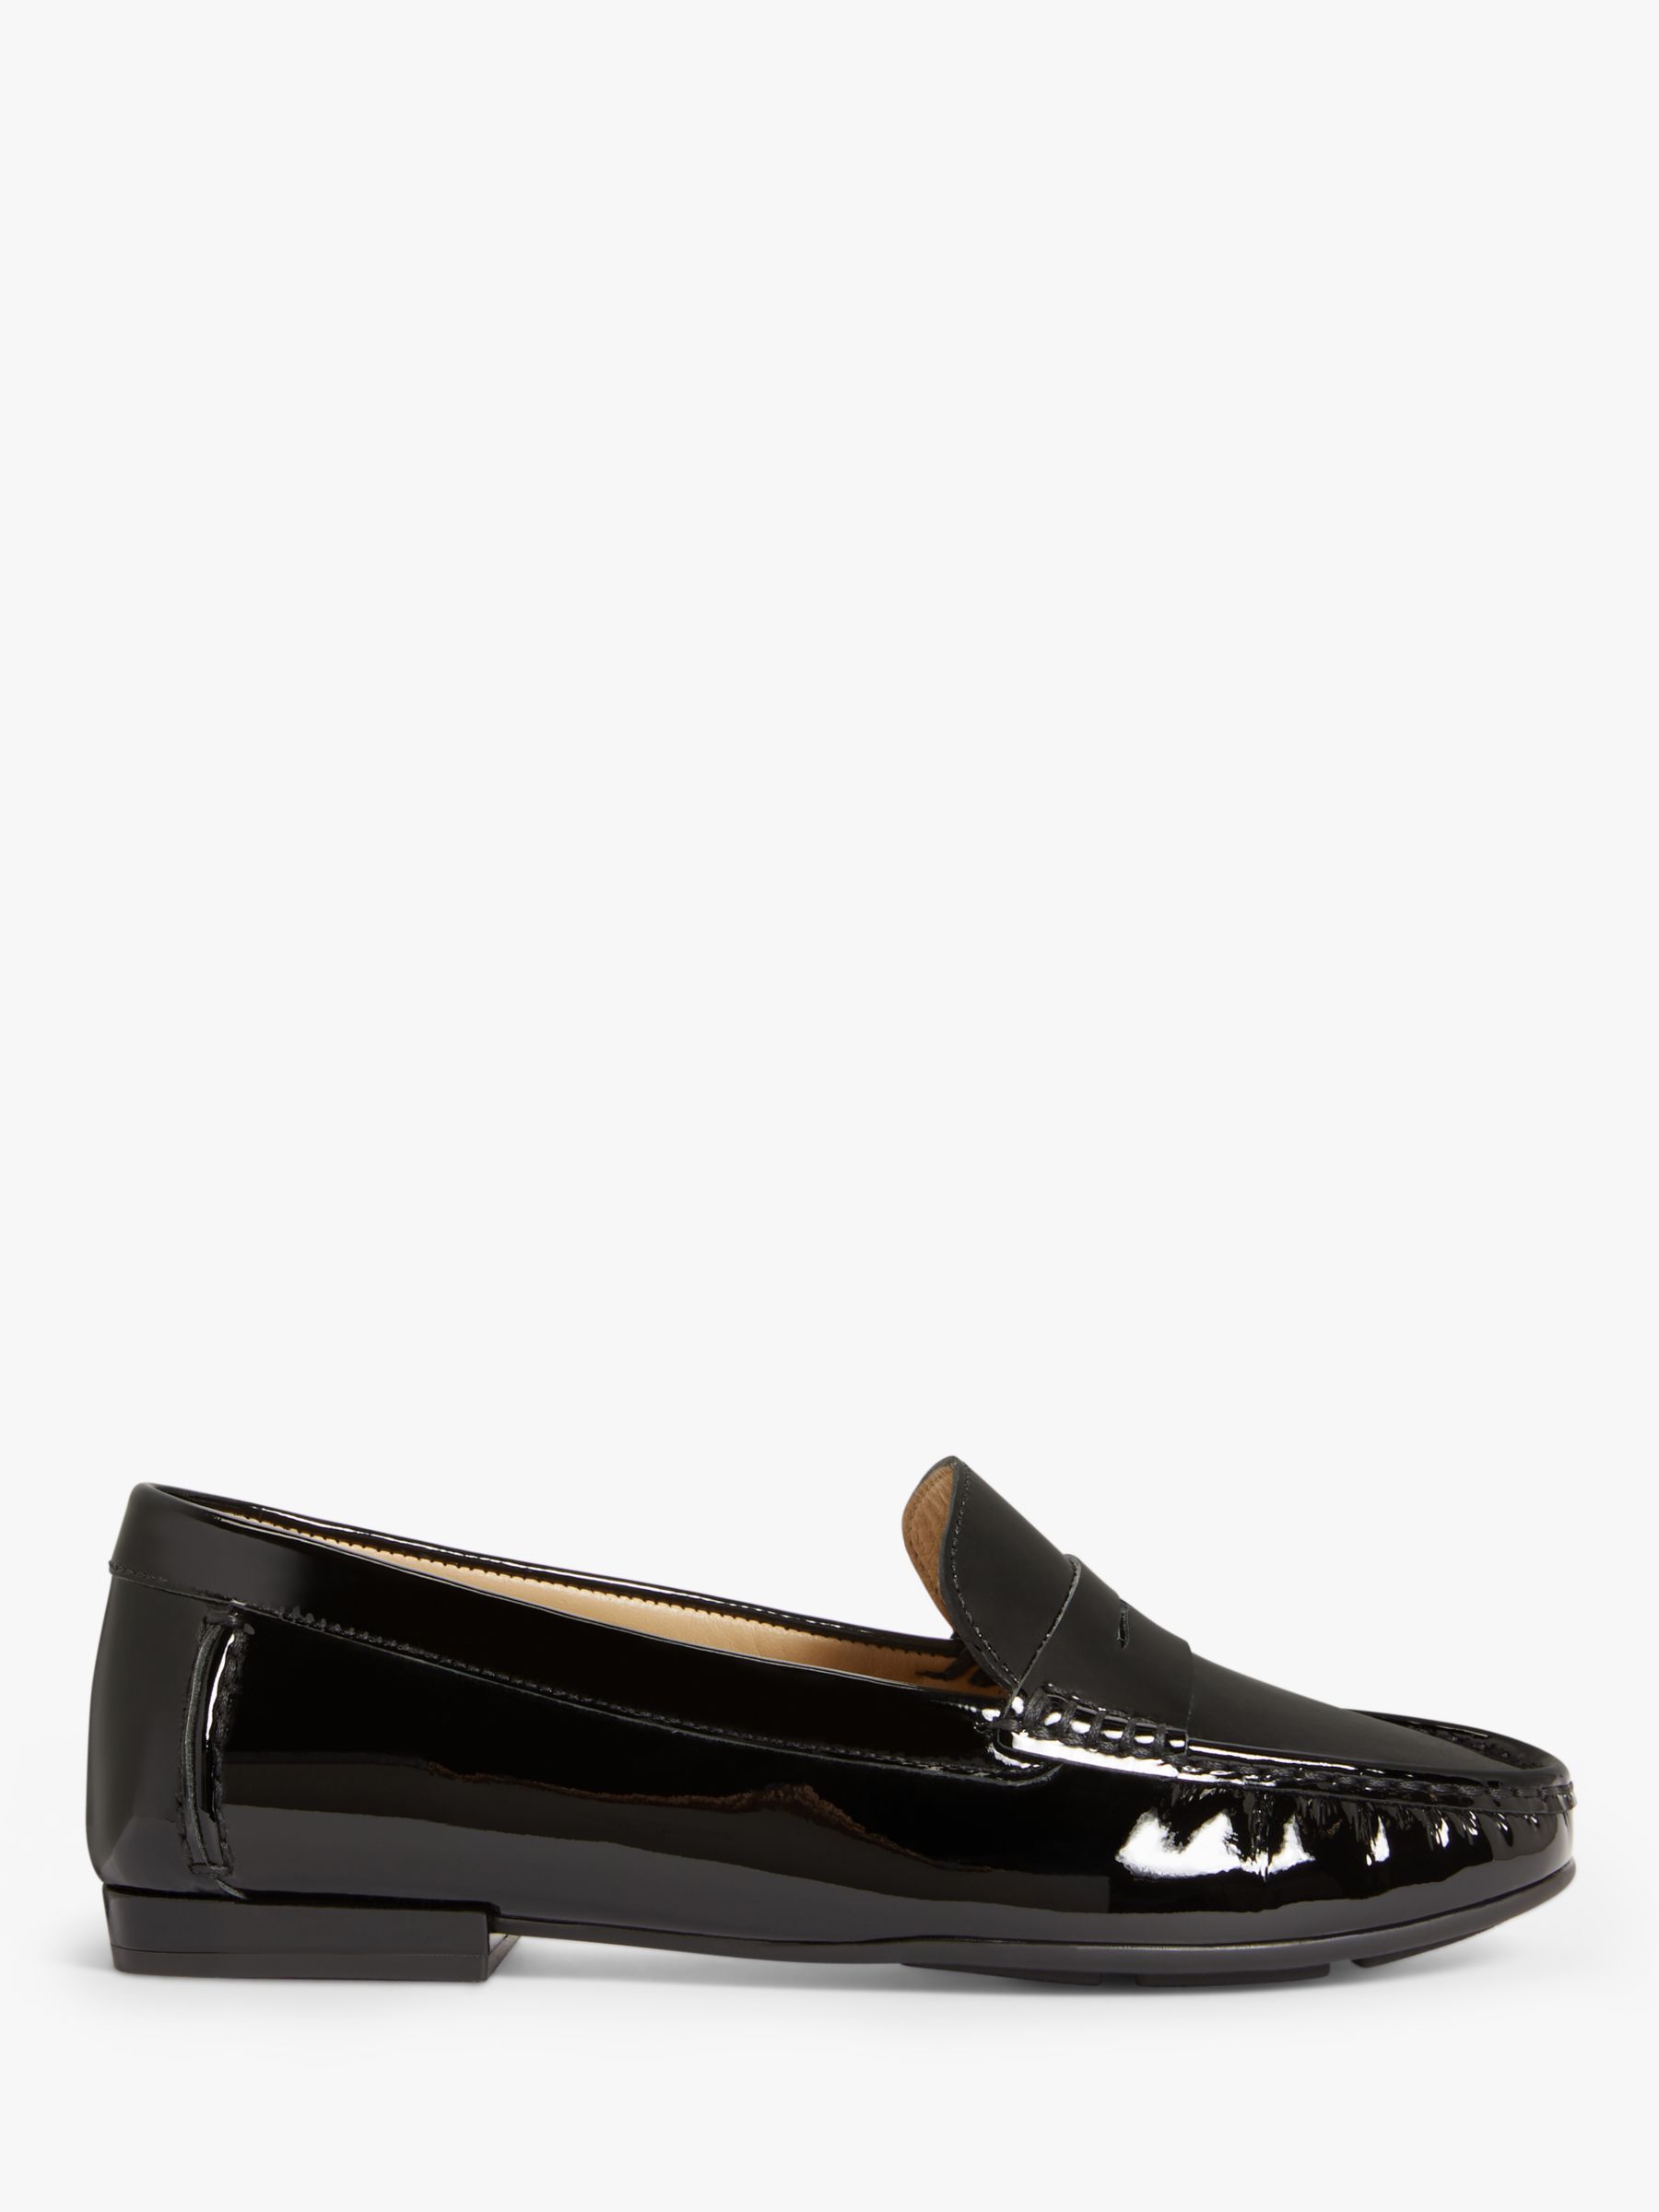 John Lewis Wide Fit Penny Patent Leather Moccasins, Black, 3